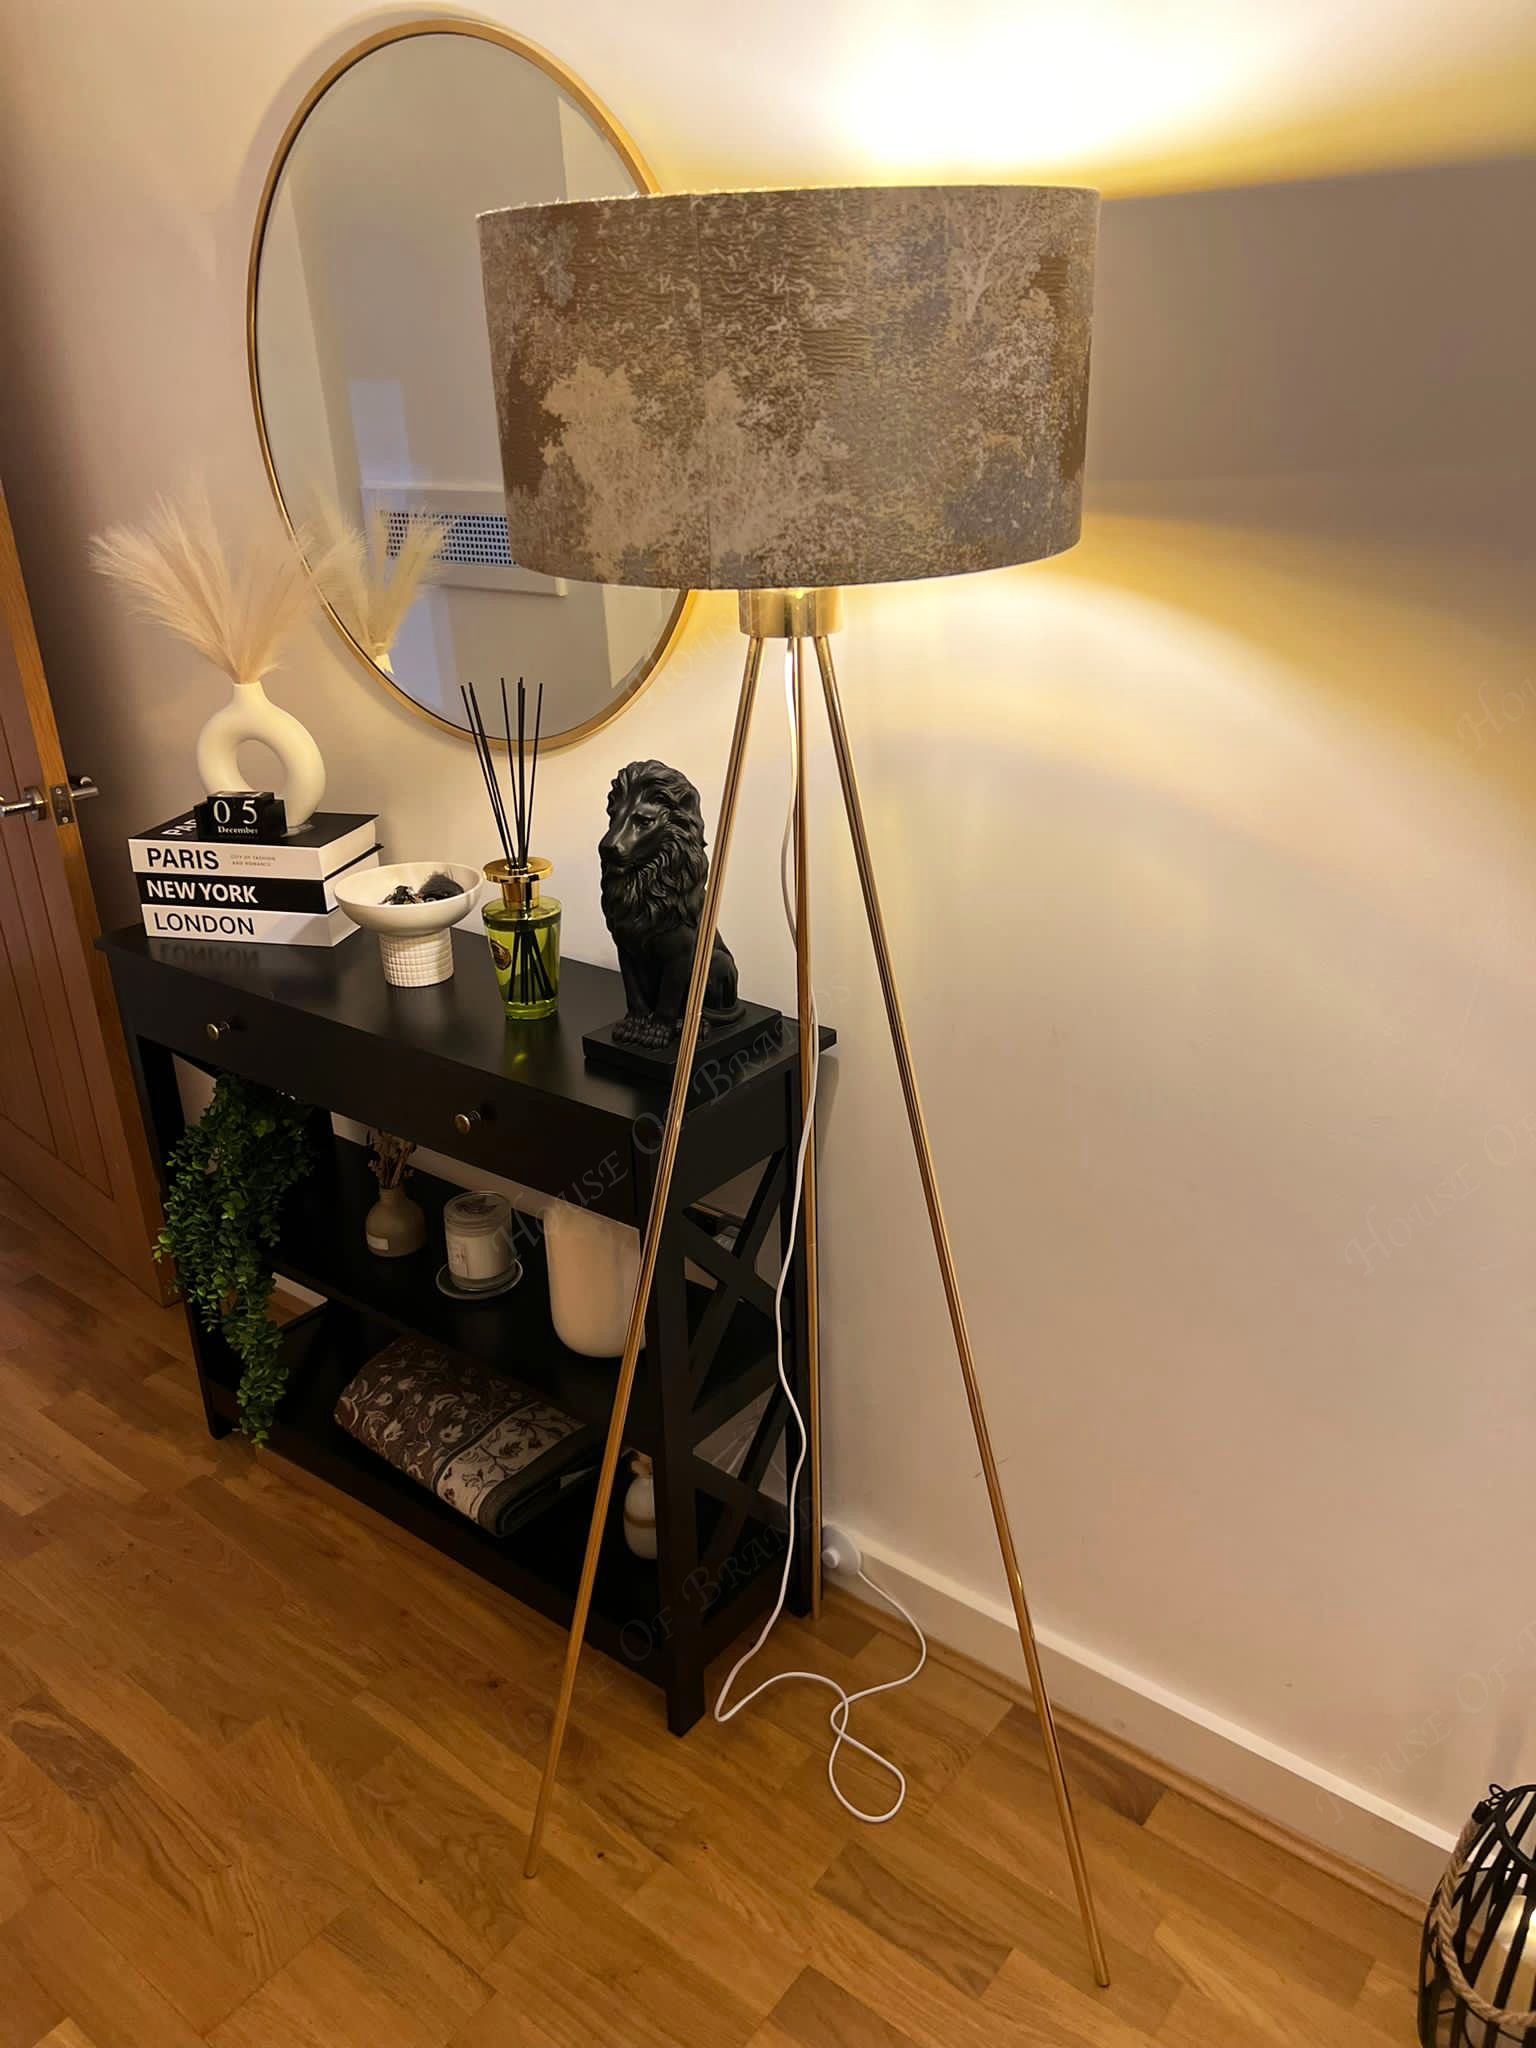 159cm Gold Tripod Floor Lamp with Ivory Linen Shade Gold Inside